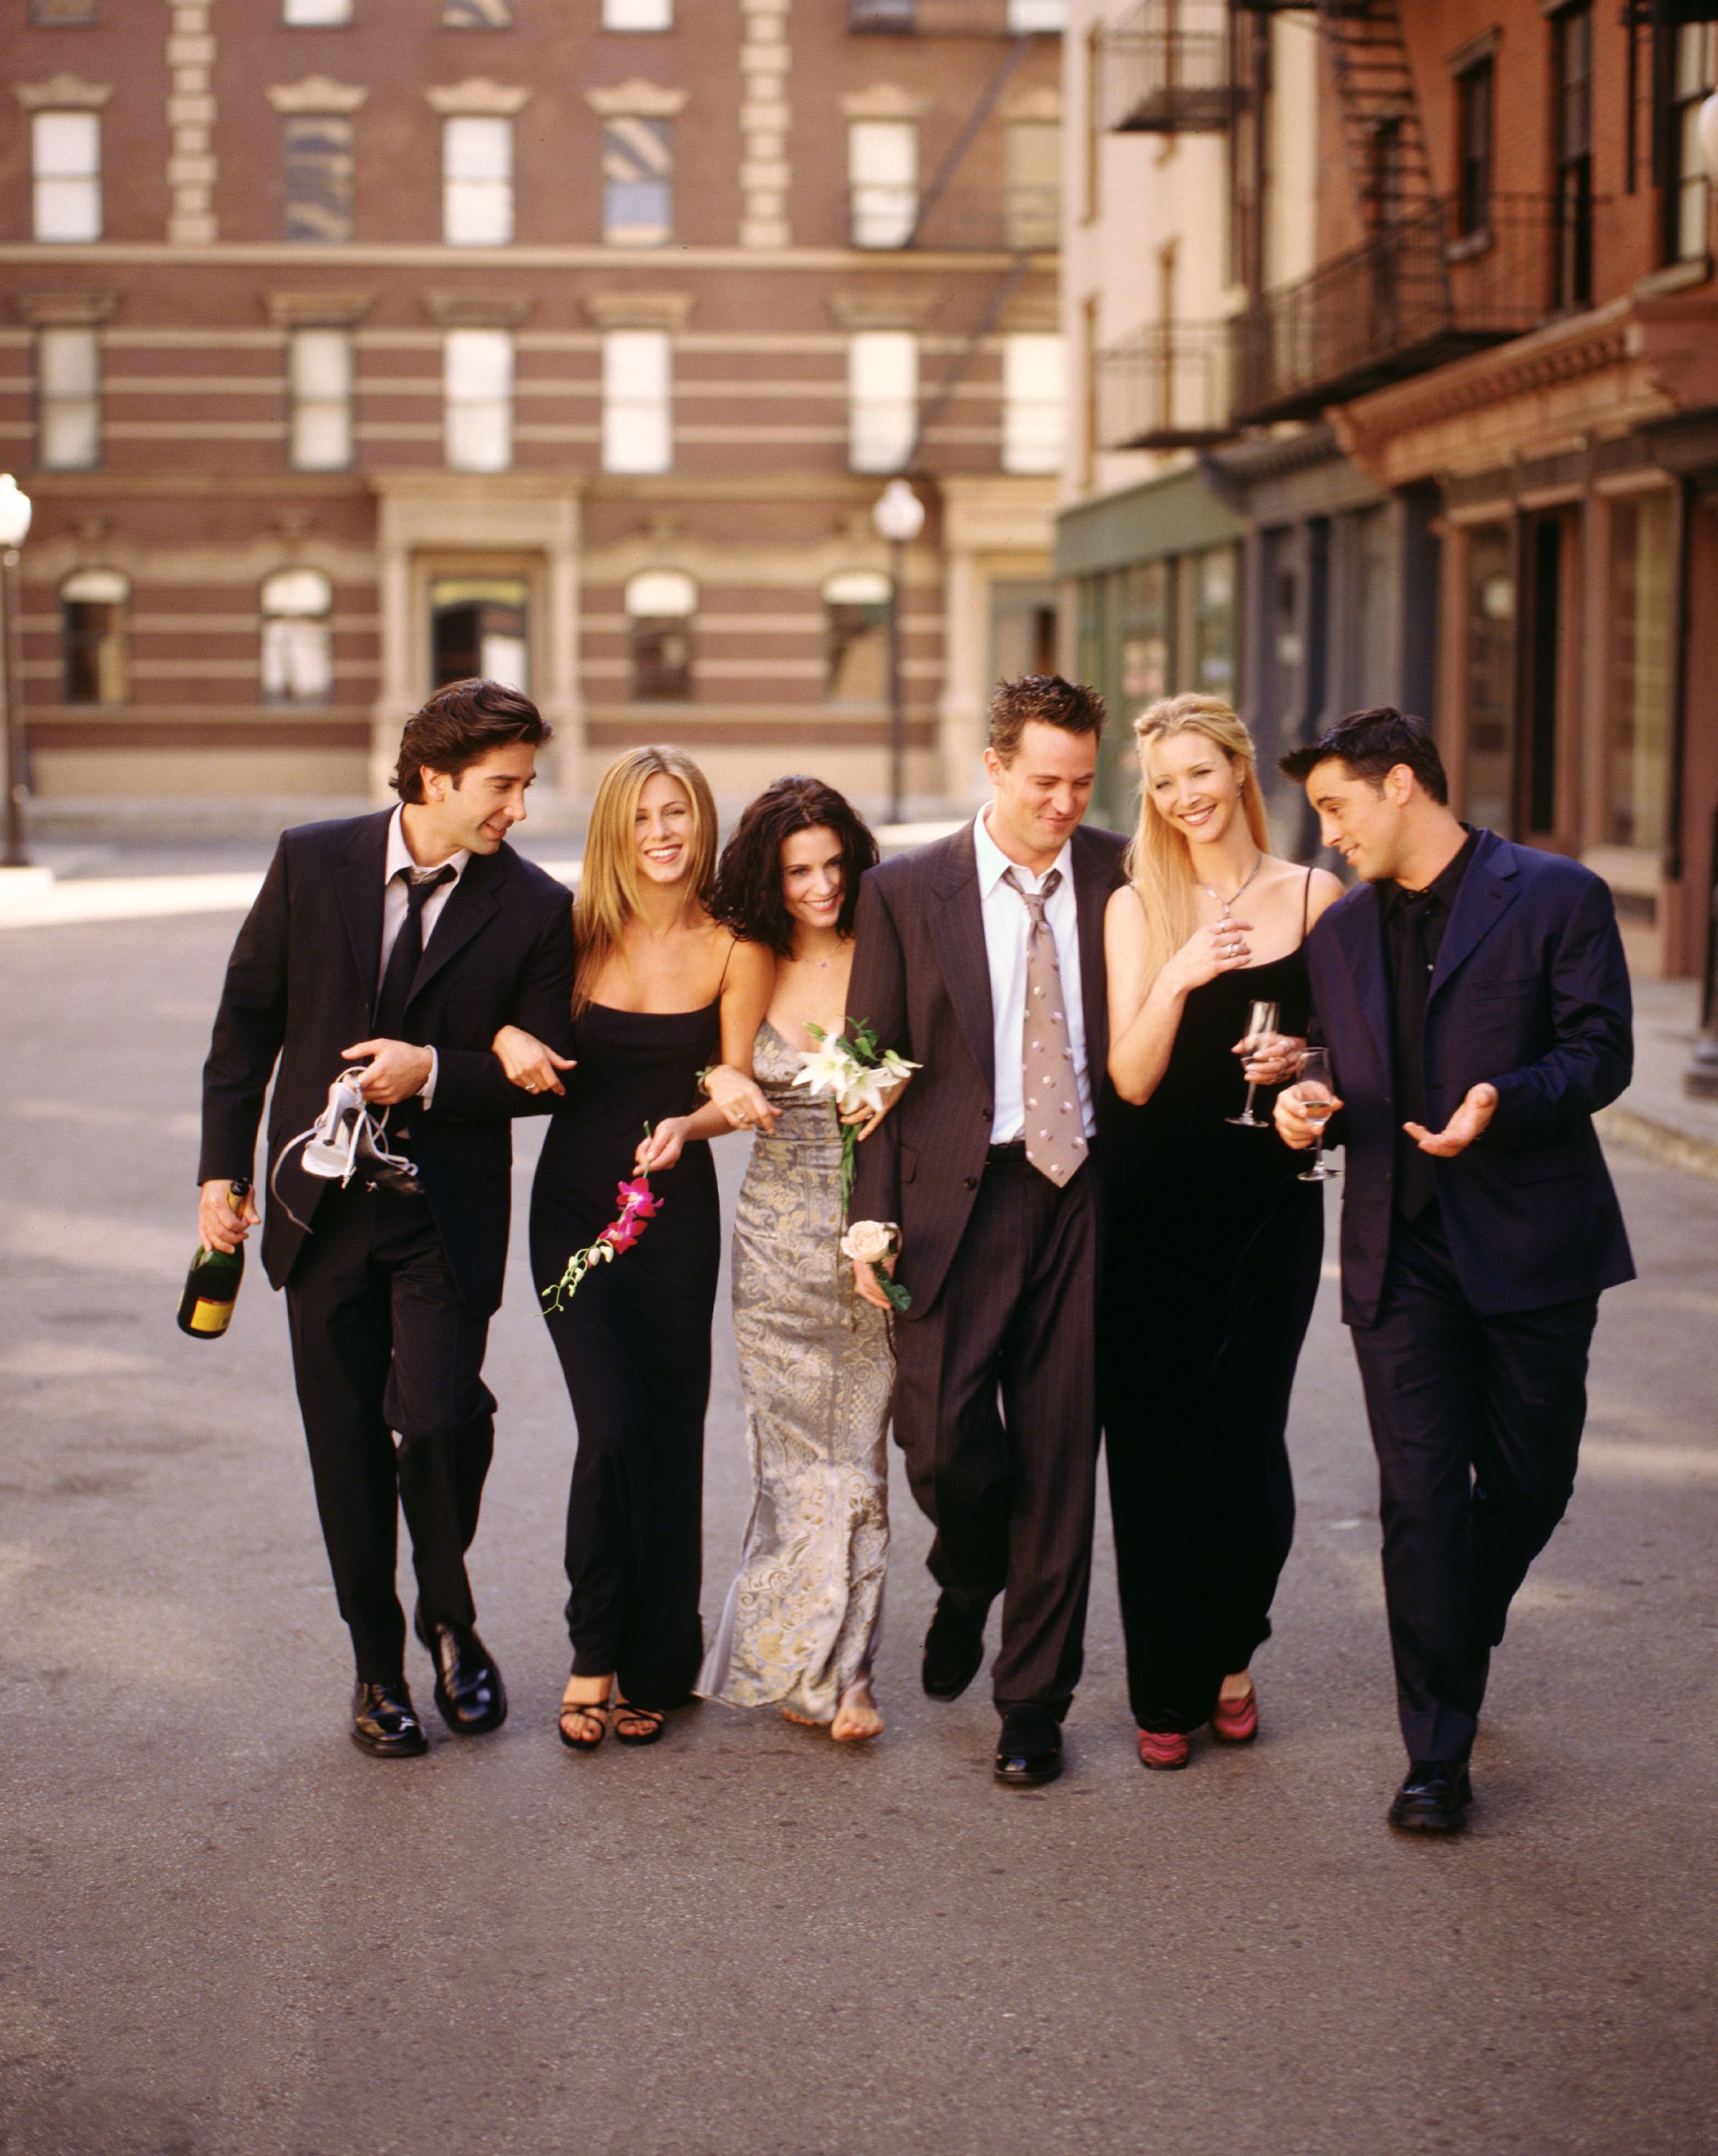 A snapshot of the cast members of NBC's comedy series "Friends" including David Schwimmer, Jennifer Aniston, Courteney Cox, Matthew Perry, Lisa Kudrow, Matt LeBlanc taken in 2001. | Photo: Getty Images 